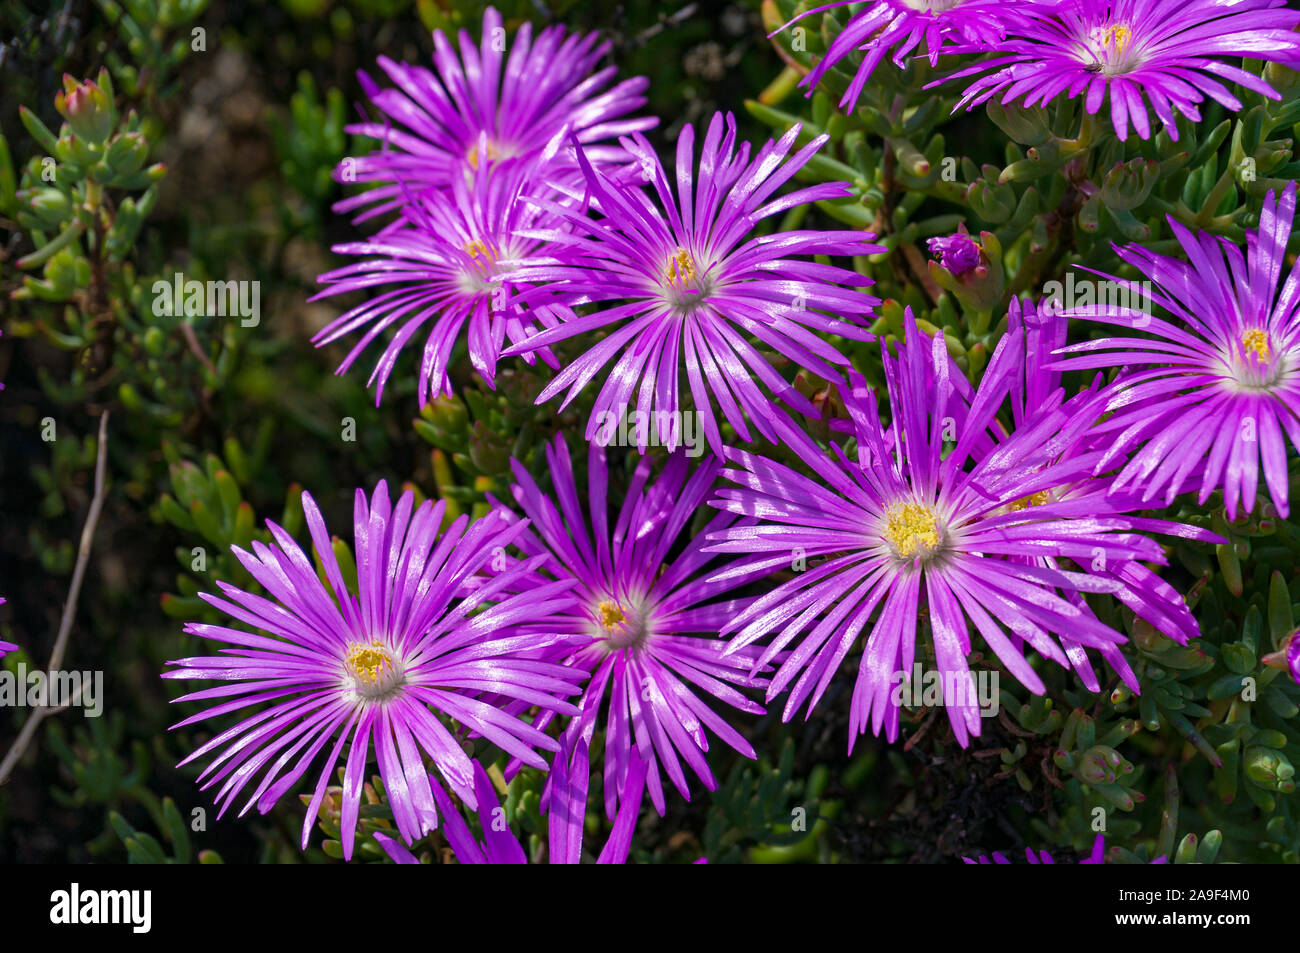 Purple iceplant flower or Hardy Ice Plant bright purple flowers on flowerbed in the garden Stock Photo